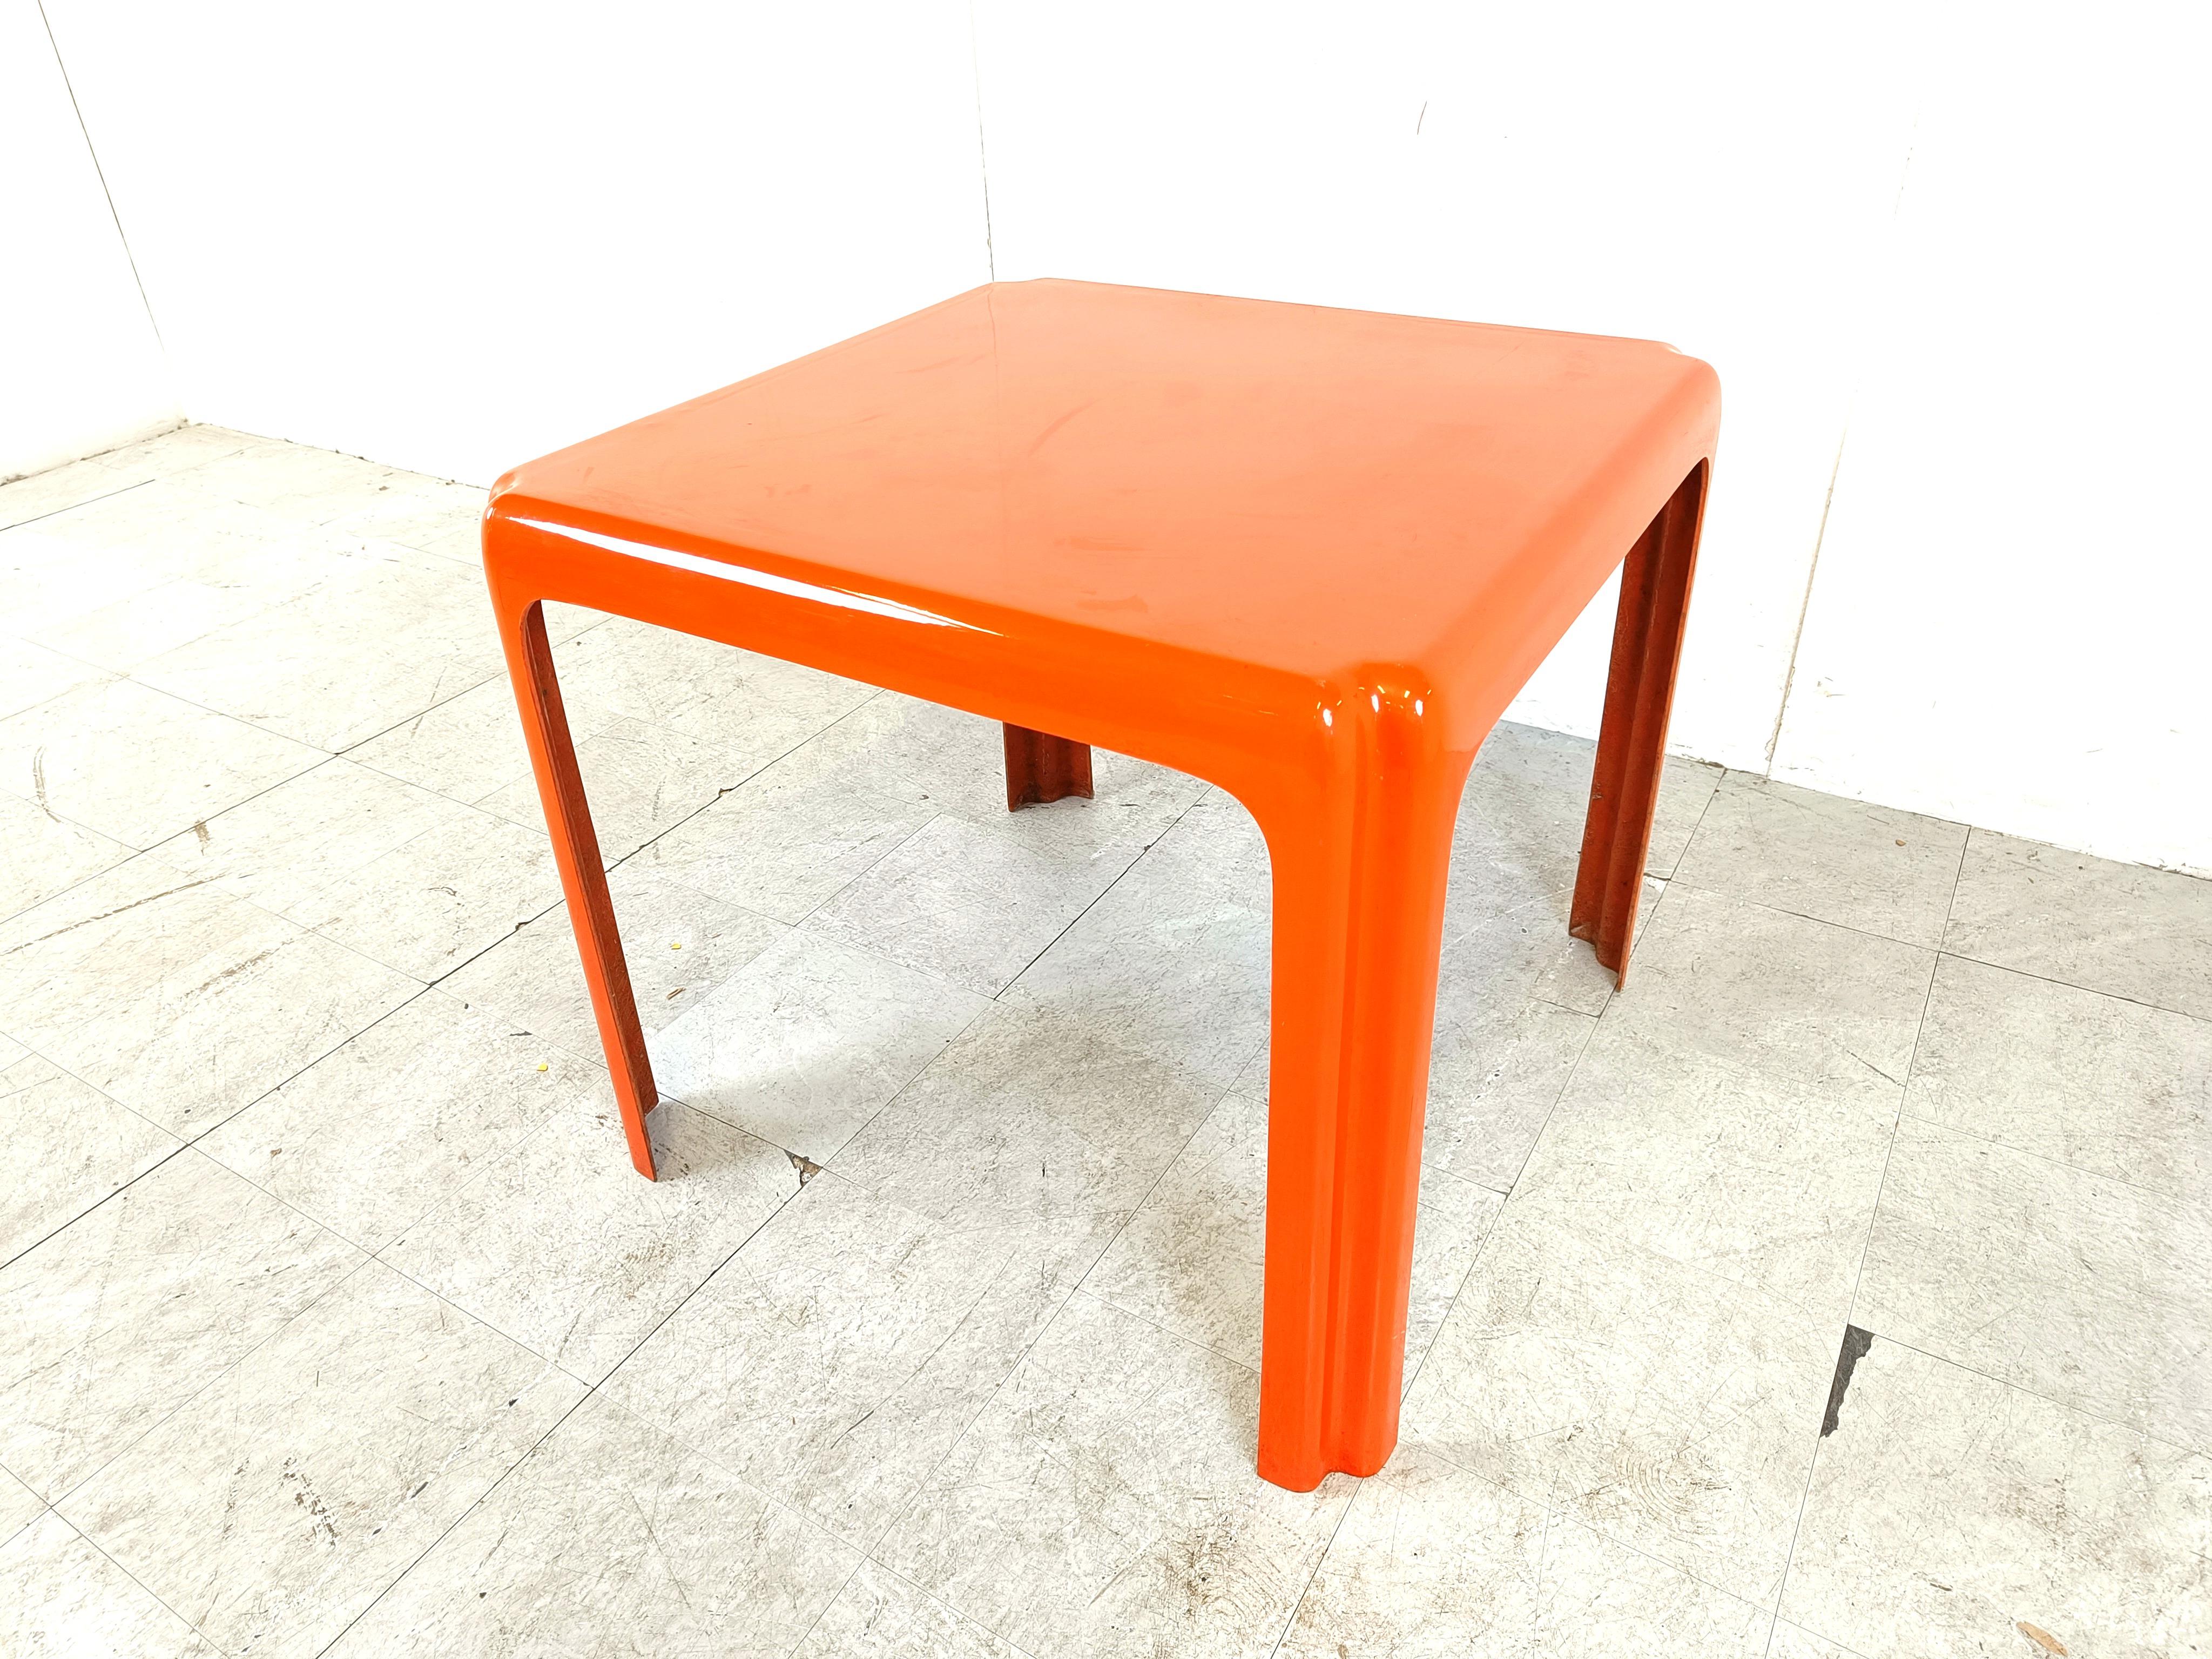 Original seventies space age kitchen table or side table made from fiberglass.

Beautiful period piece with a flashy orange colour.

Belgian Design

1970s 

Height: 73cm
Width x depth: 80cm

Ref.: 203055